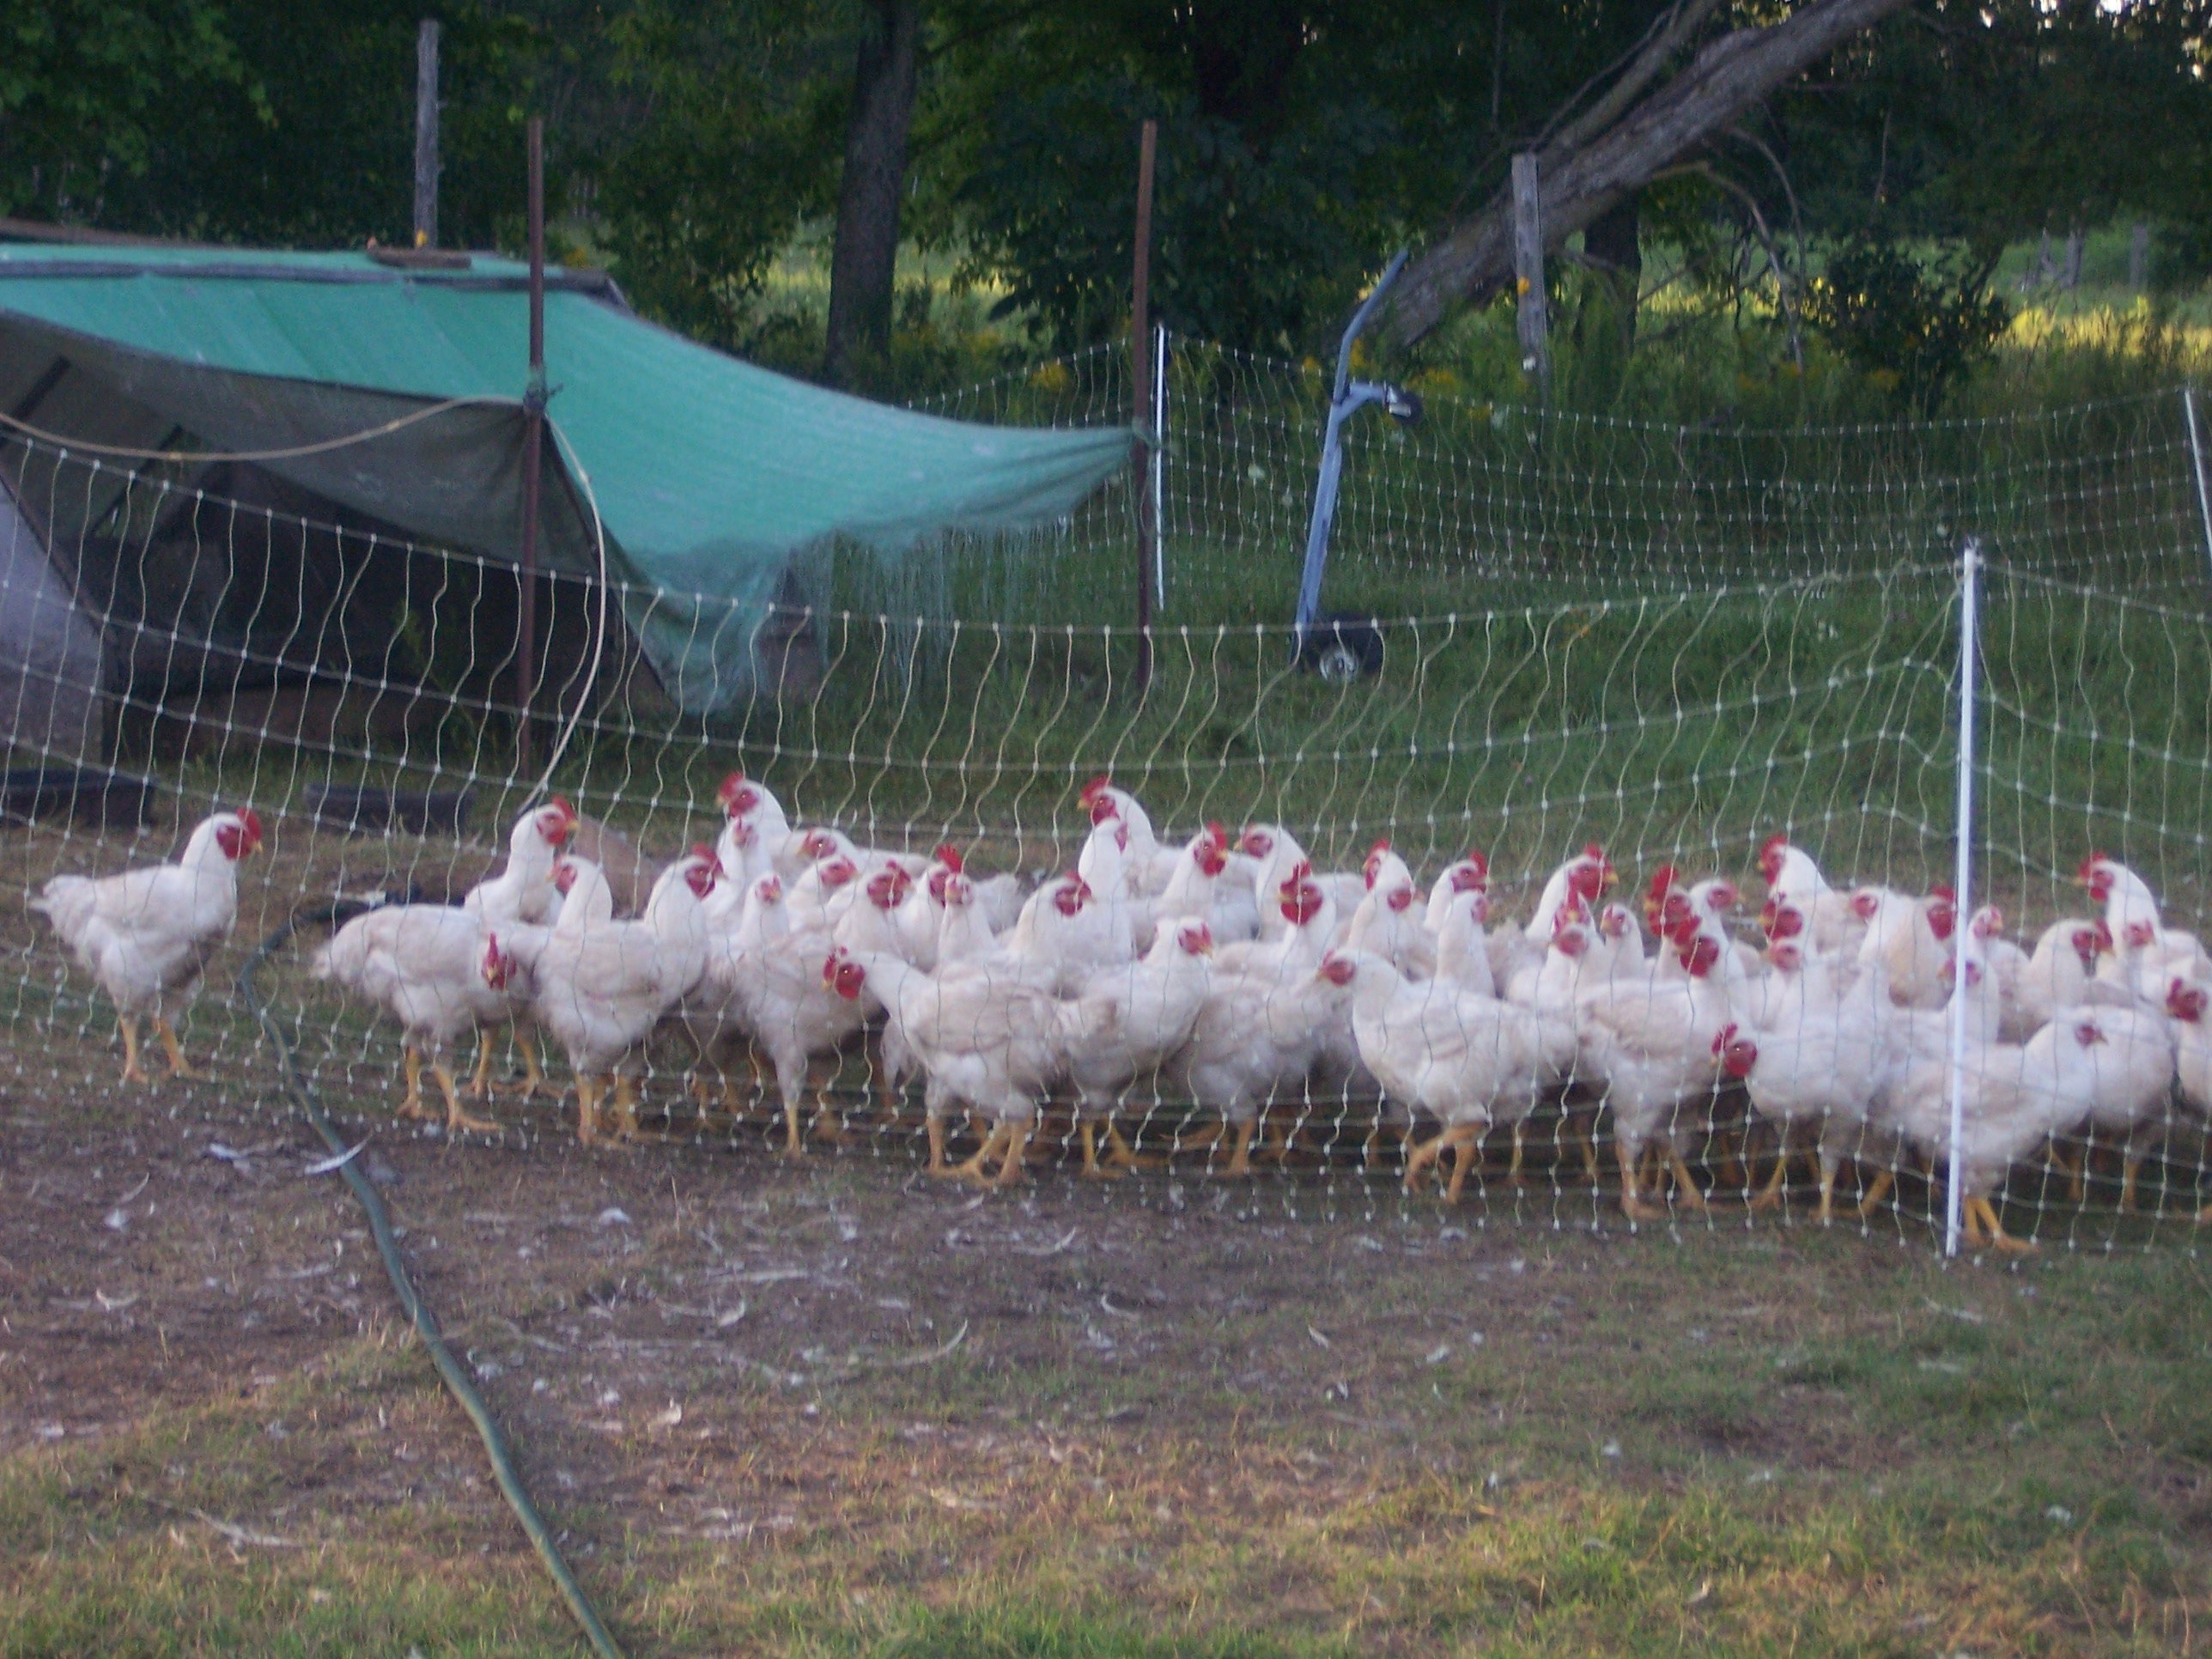 If you have 25 acres or 5 acres or even less than 1 acre, organic chicken farming can put food in your freezer and money in your wallet.